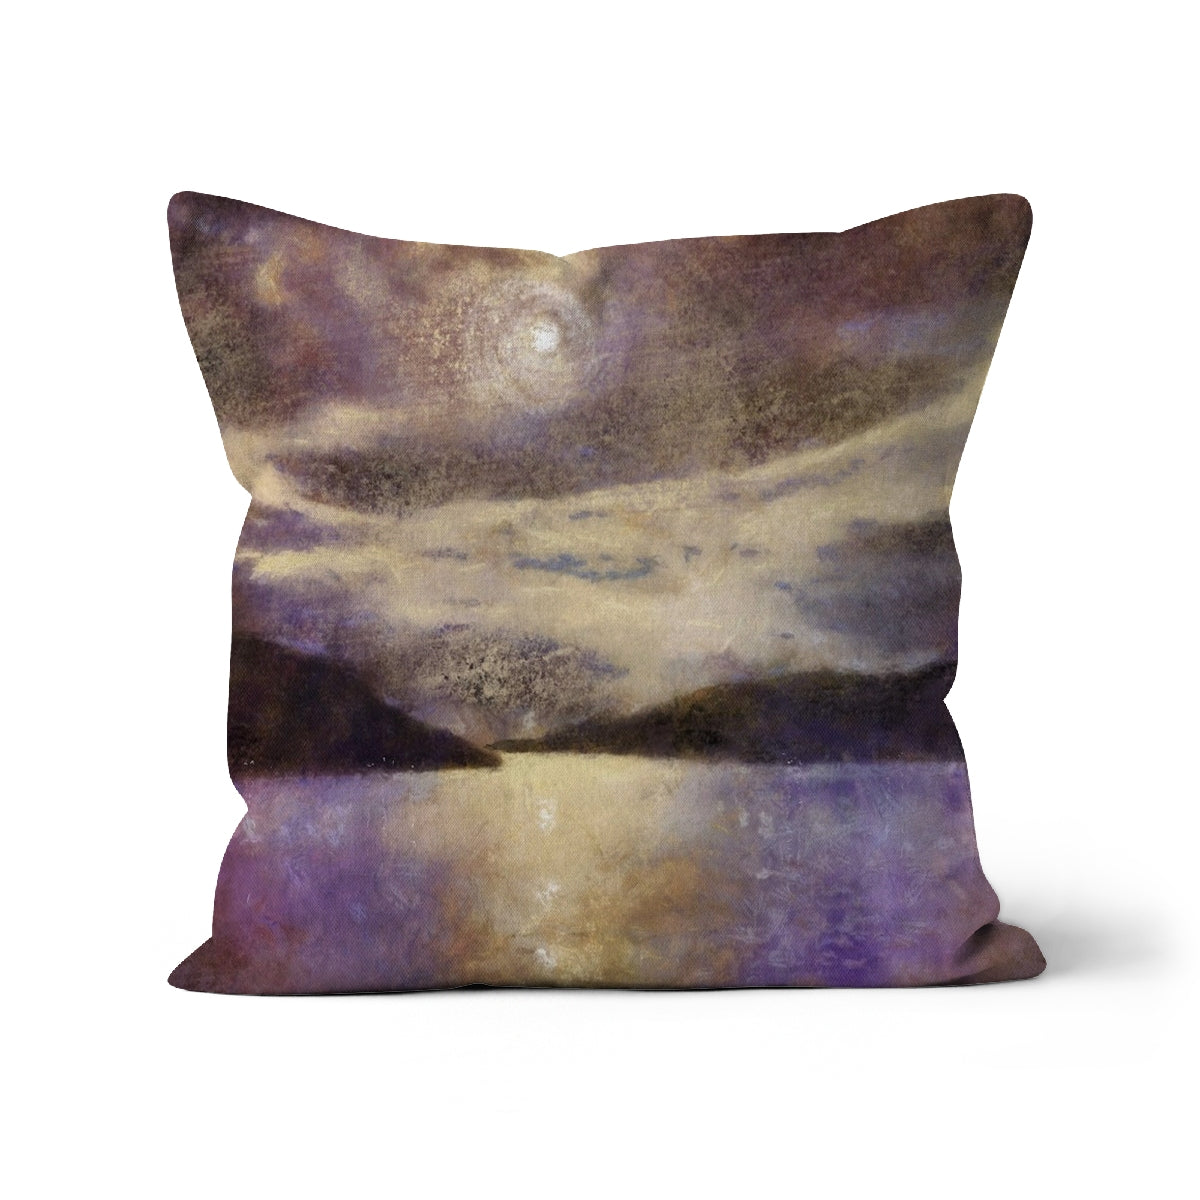 Moonlight Meets Lewis & Harris Art Gifts Cushion-Cushions-Hebridean Islands Art Gallery-Canvas-12"x12"-Paintings, Prints, Homeware, Art Gifts From Scotland By Scottish Artist Kevin Hunter